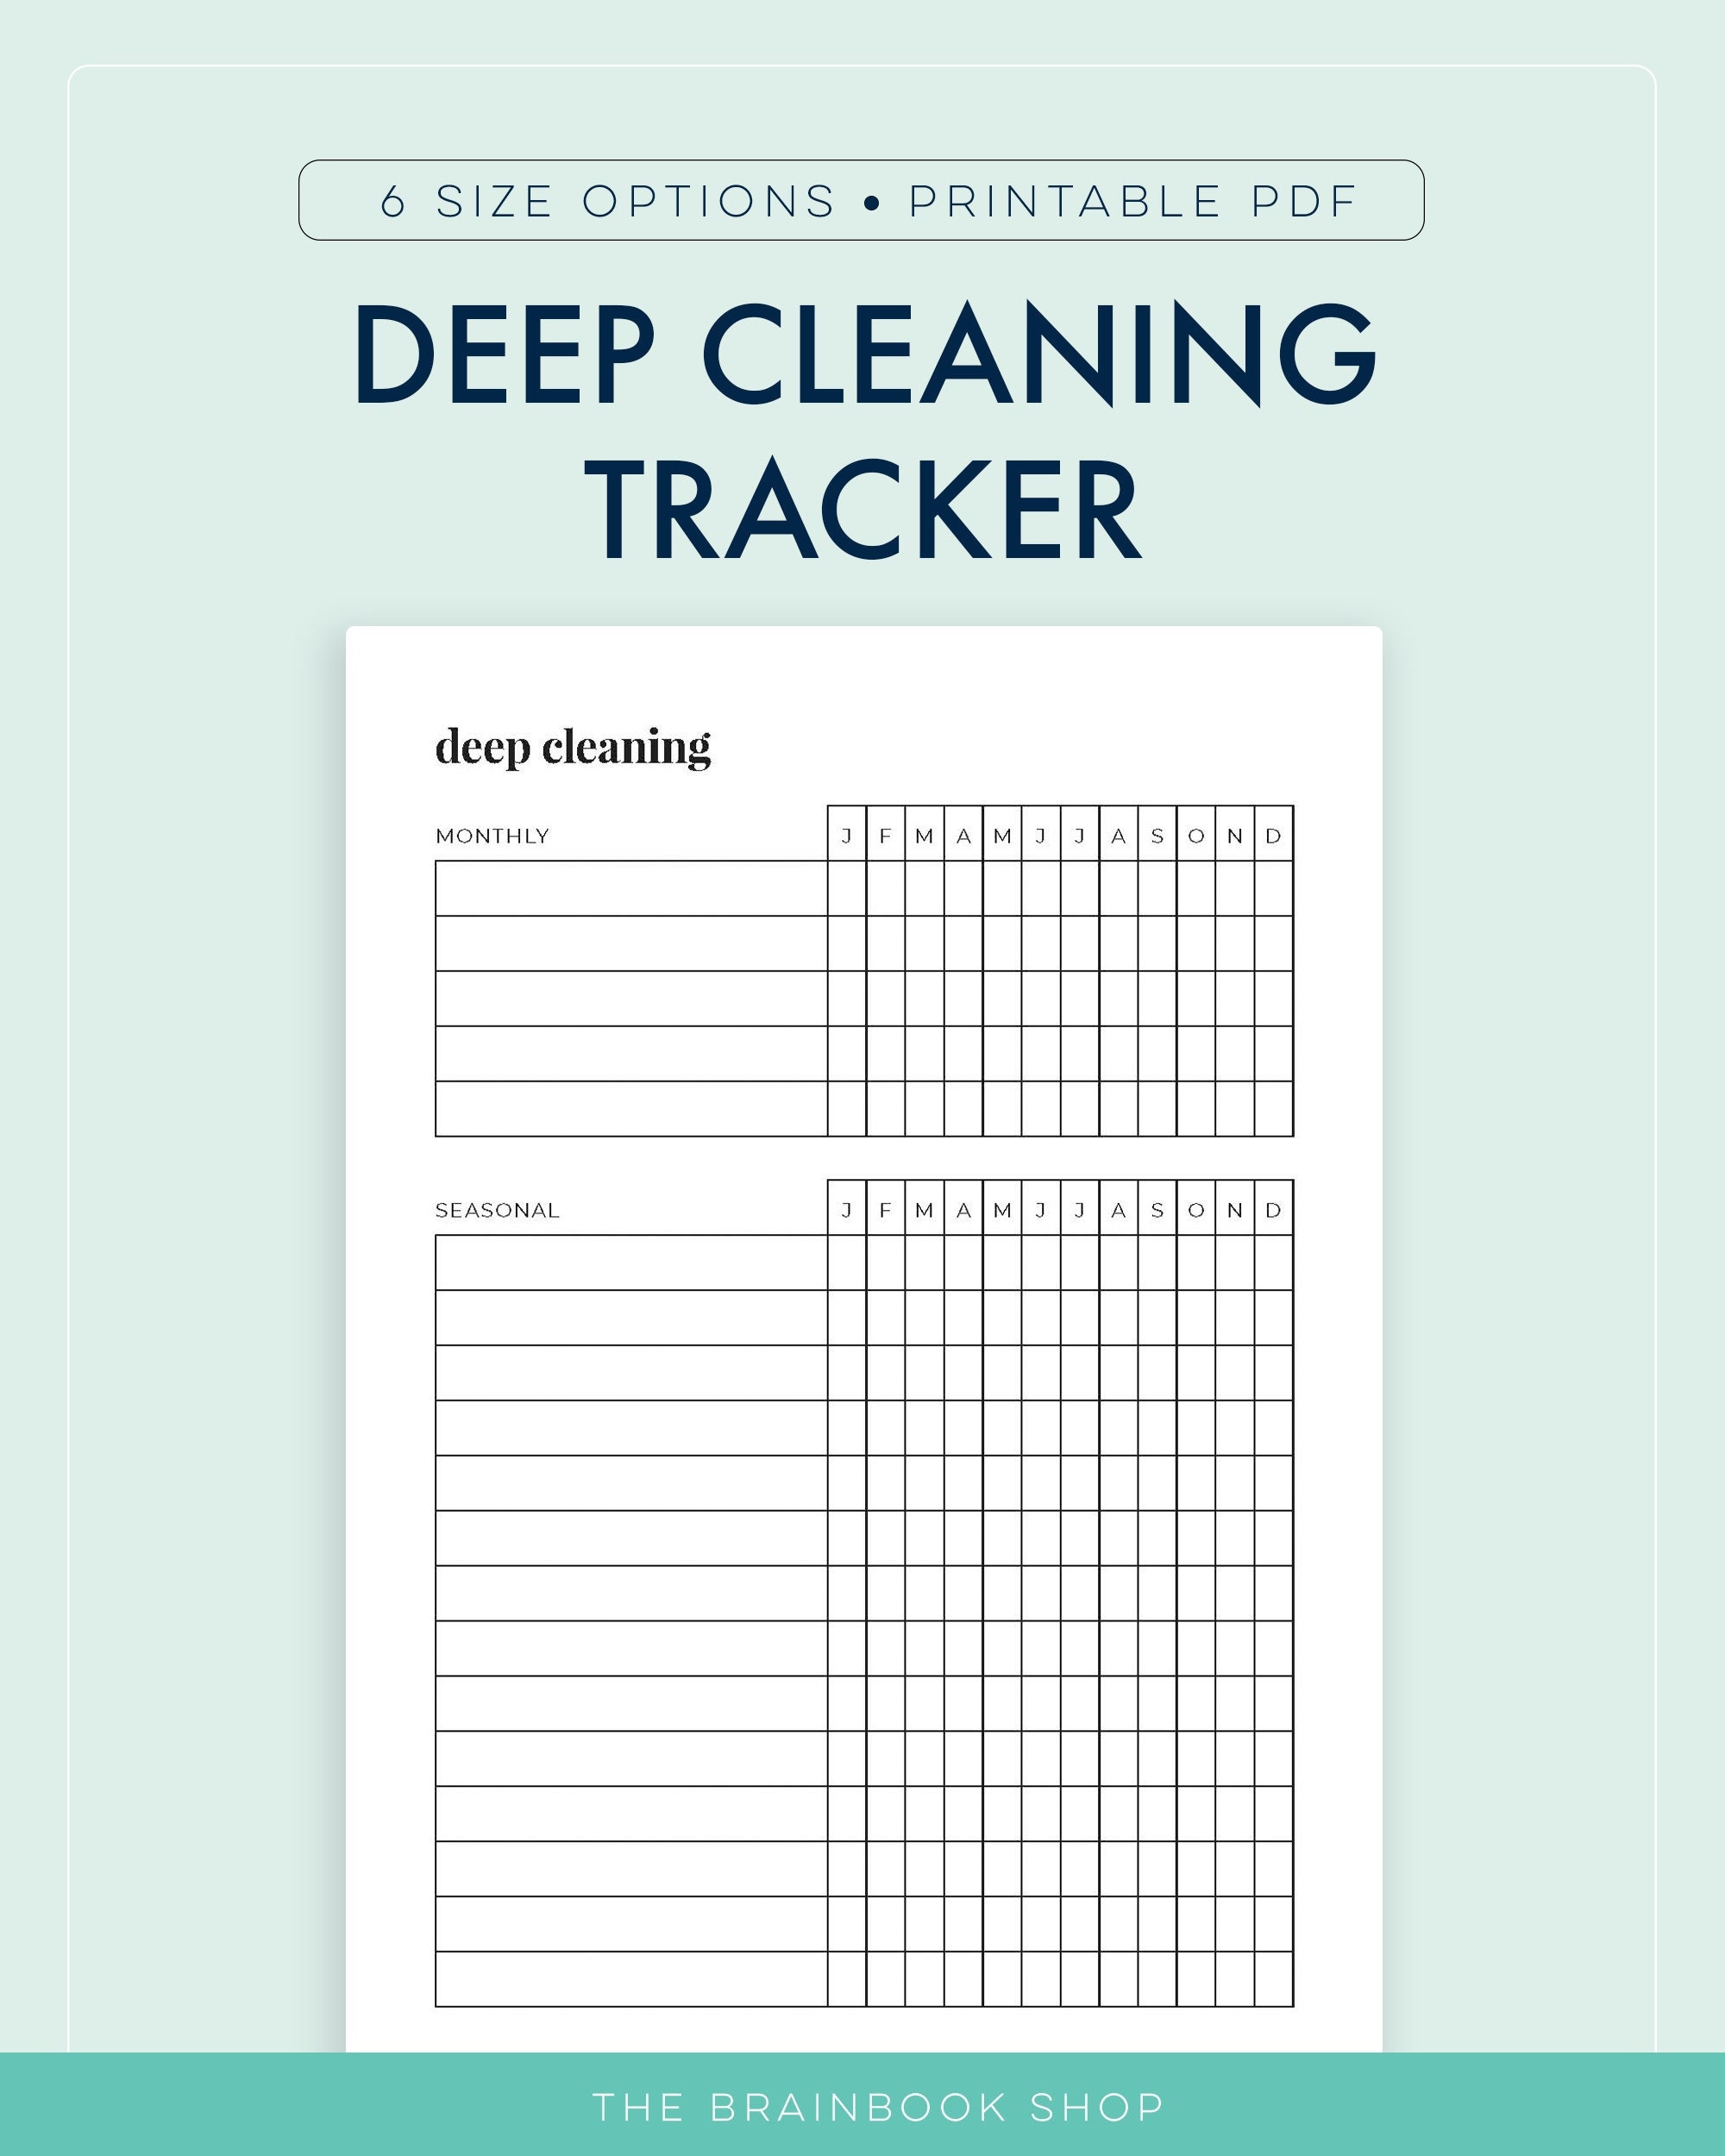 Bullet Journal Spring Cleaning Checklist Tutorial + FREE Printable!